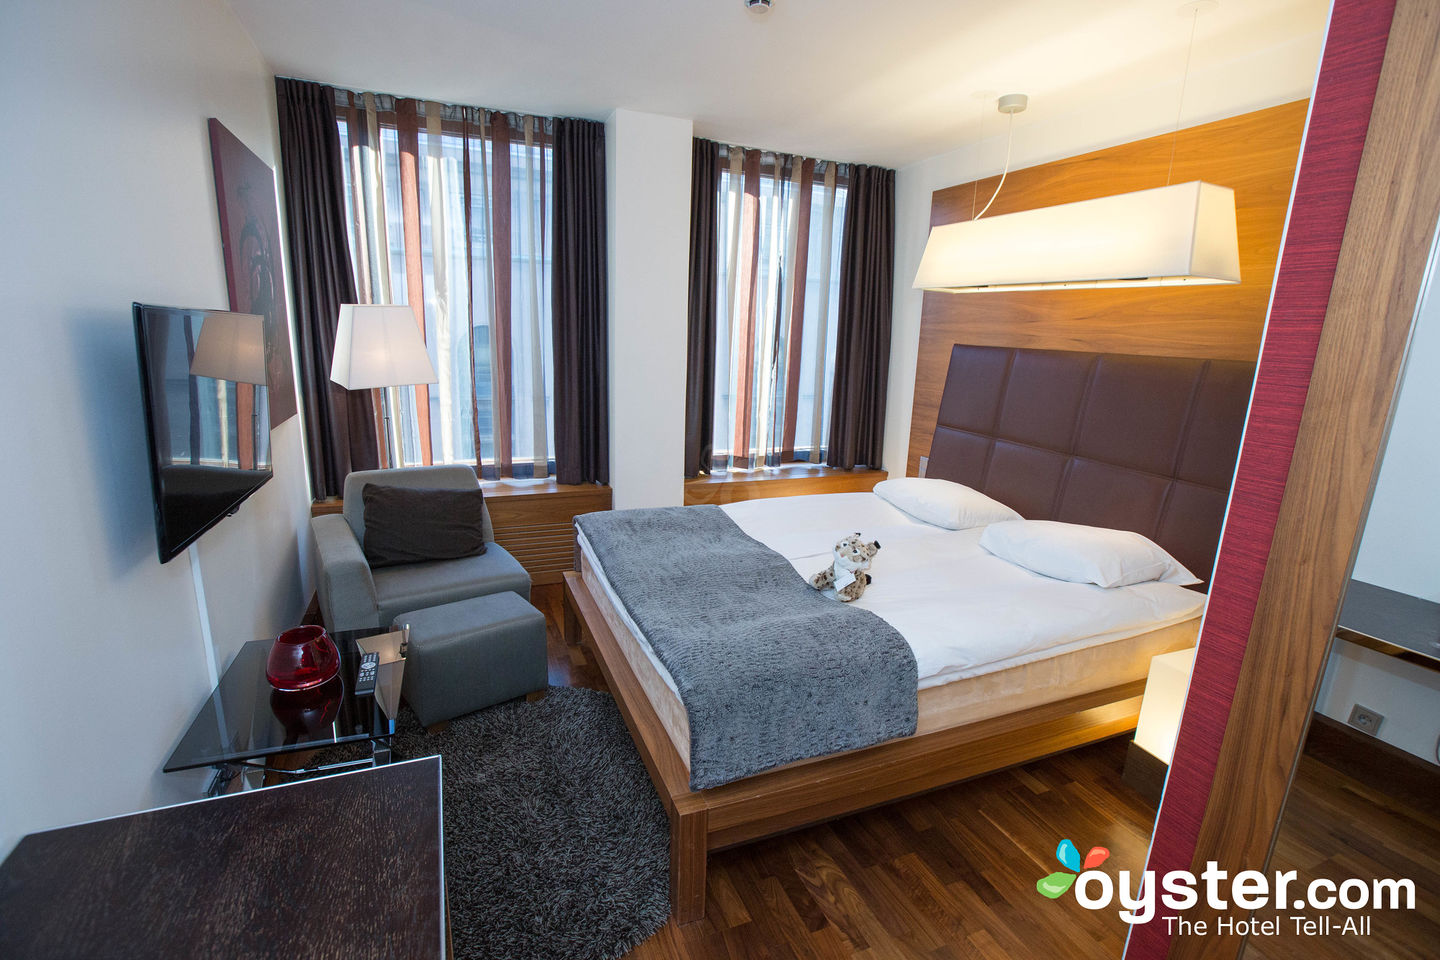 GLO Hotel Kluuvi Helsinki Review: What To REALLY Expect If You Stay